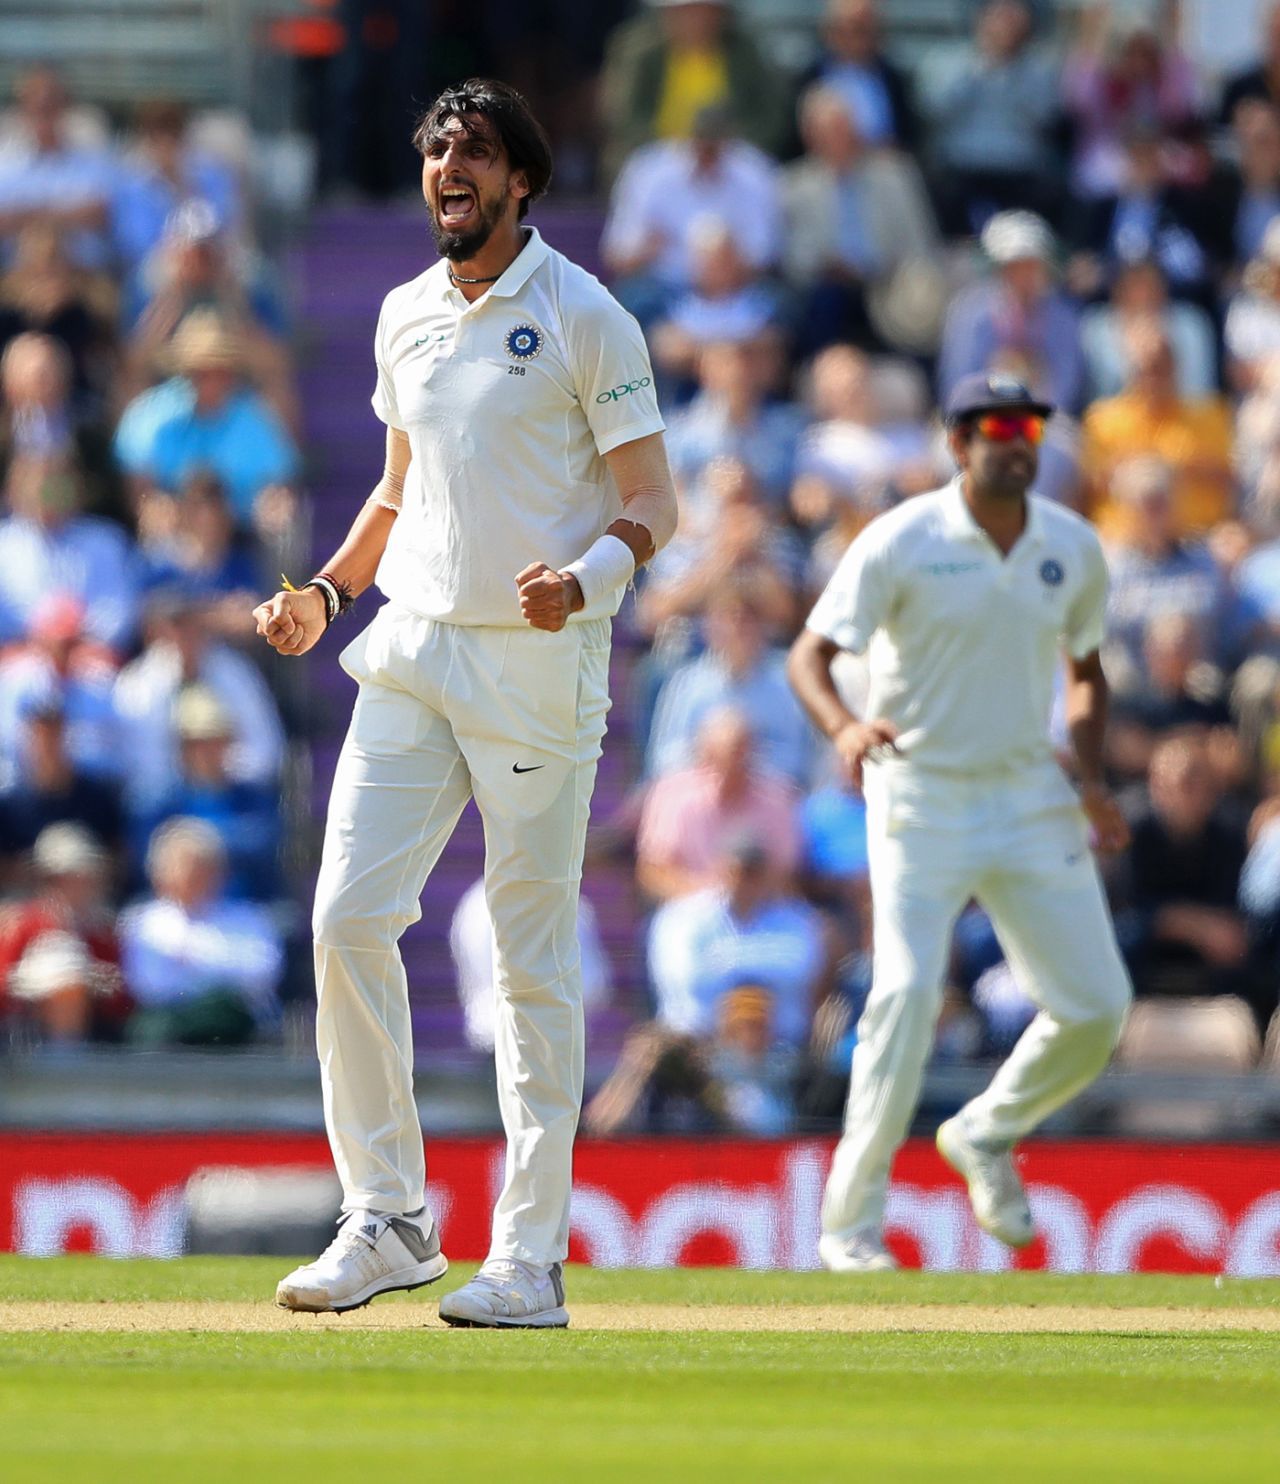 Ishant Sharma roars after dismissing Joe Root, England v India, 4th Test, Ageas Bowl, 1st day, August 30, 2018